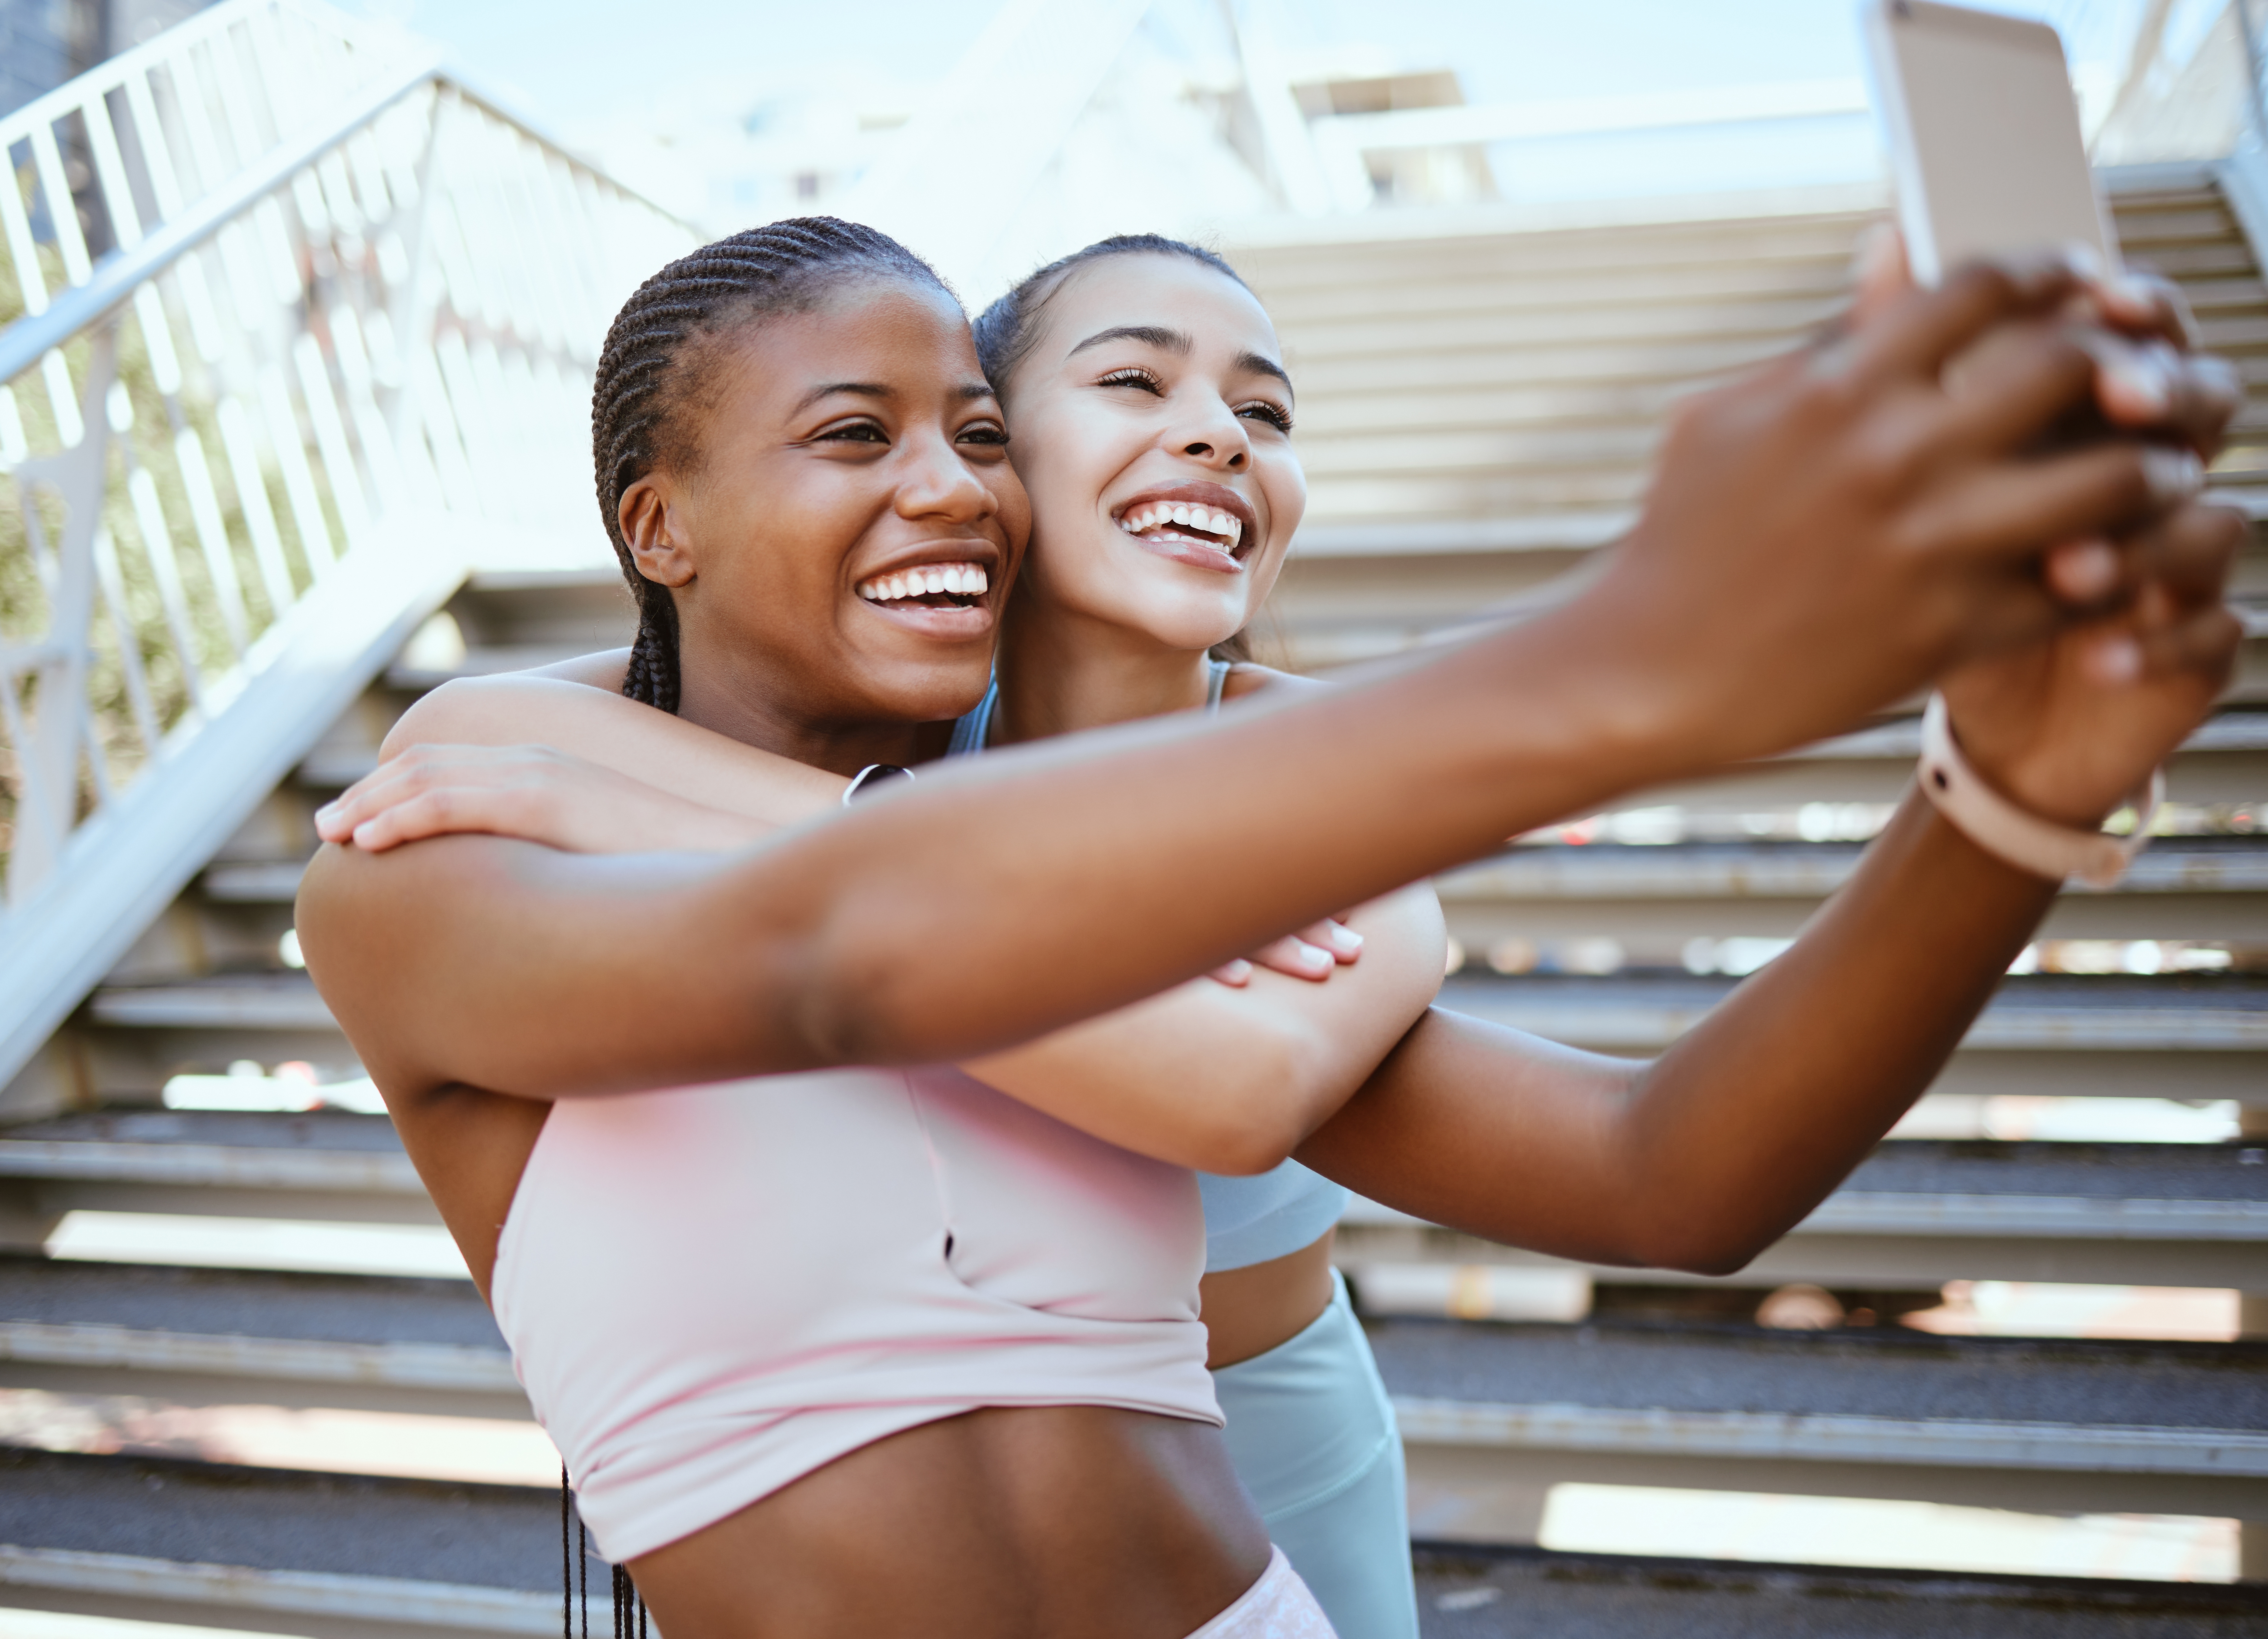 11 Fitness Post Ideas To Grow Your Instagram in 2023